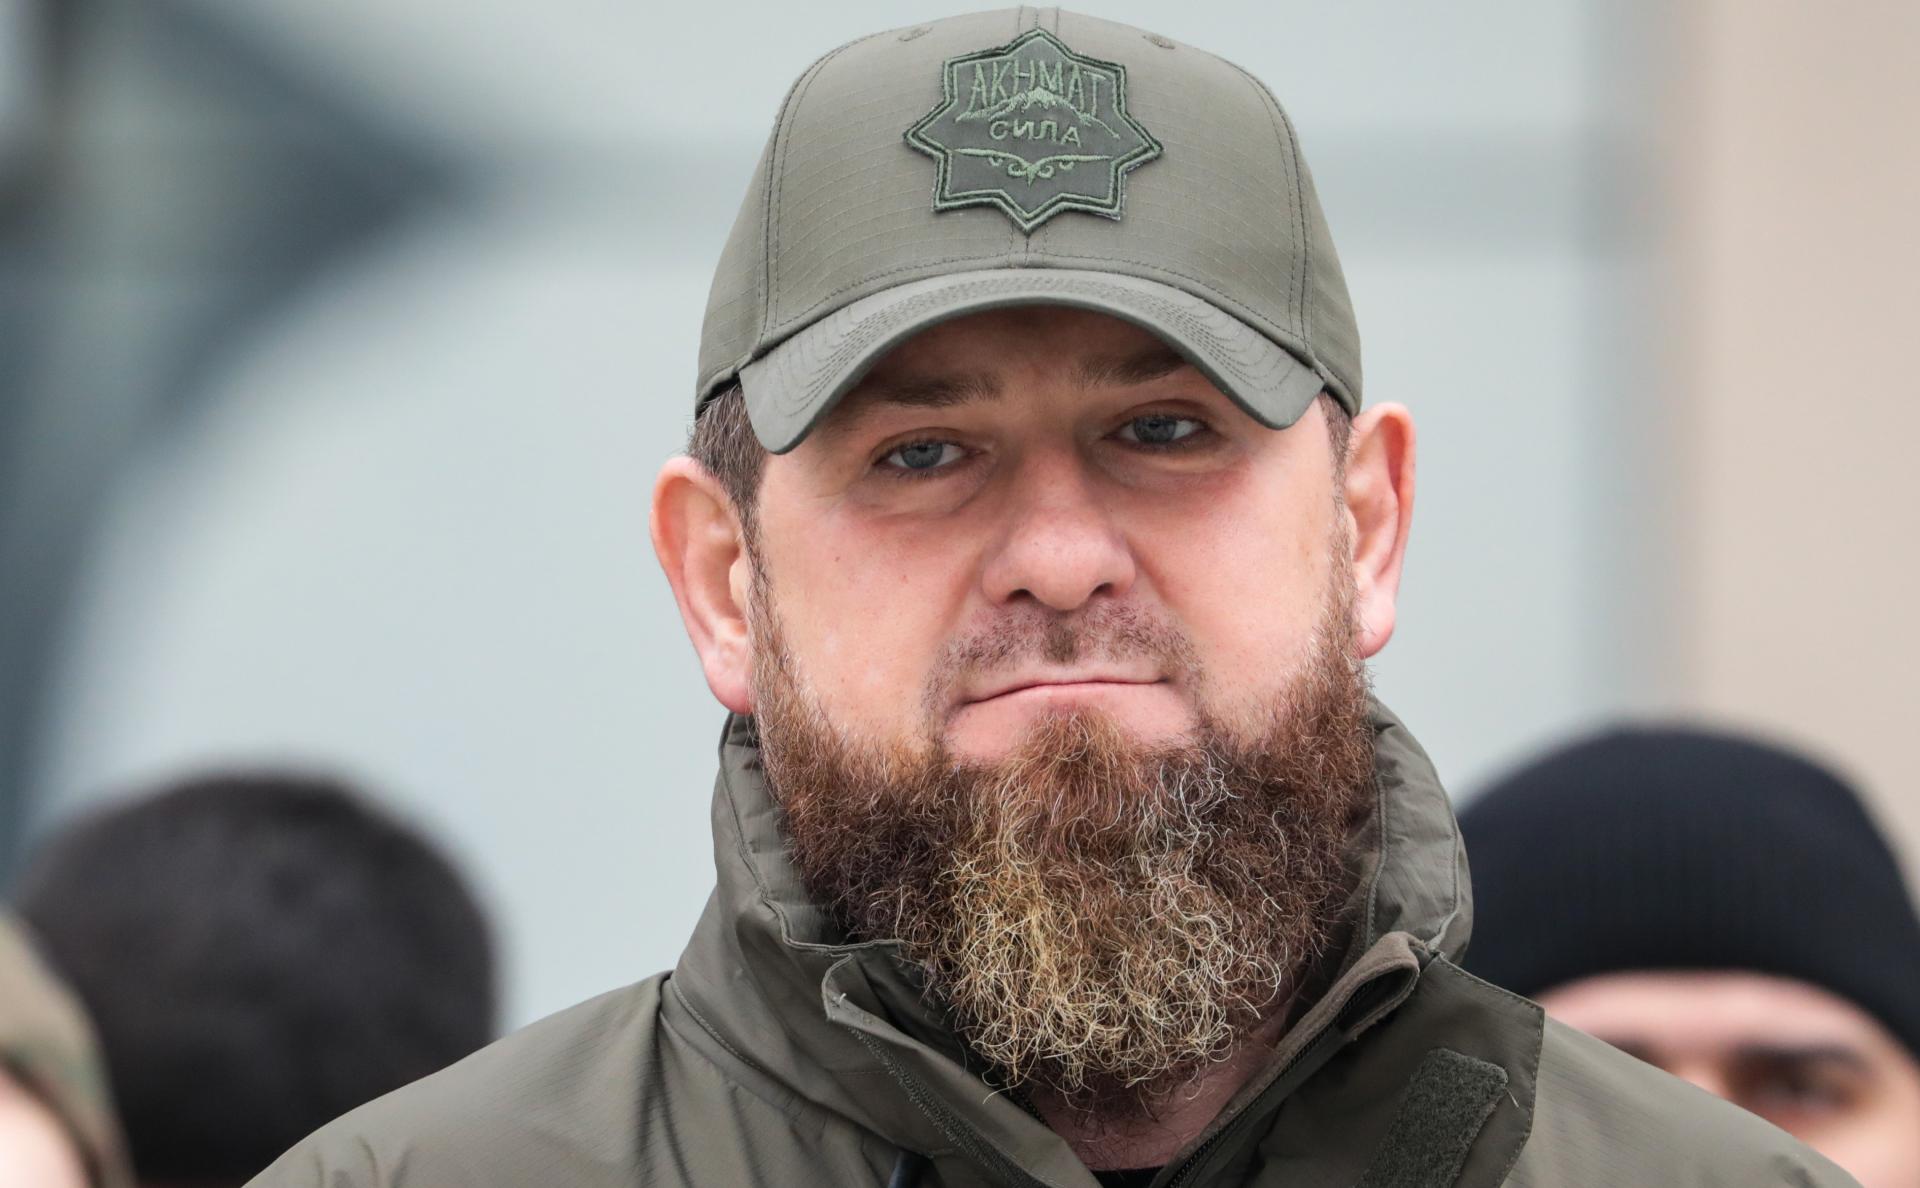 Kadyrov demanded a change in strategy in Ukraine after Russia "surrendered cities" in the Kharkiv region